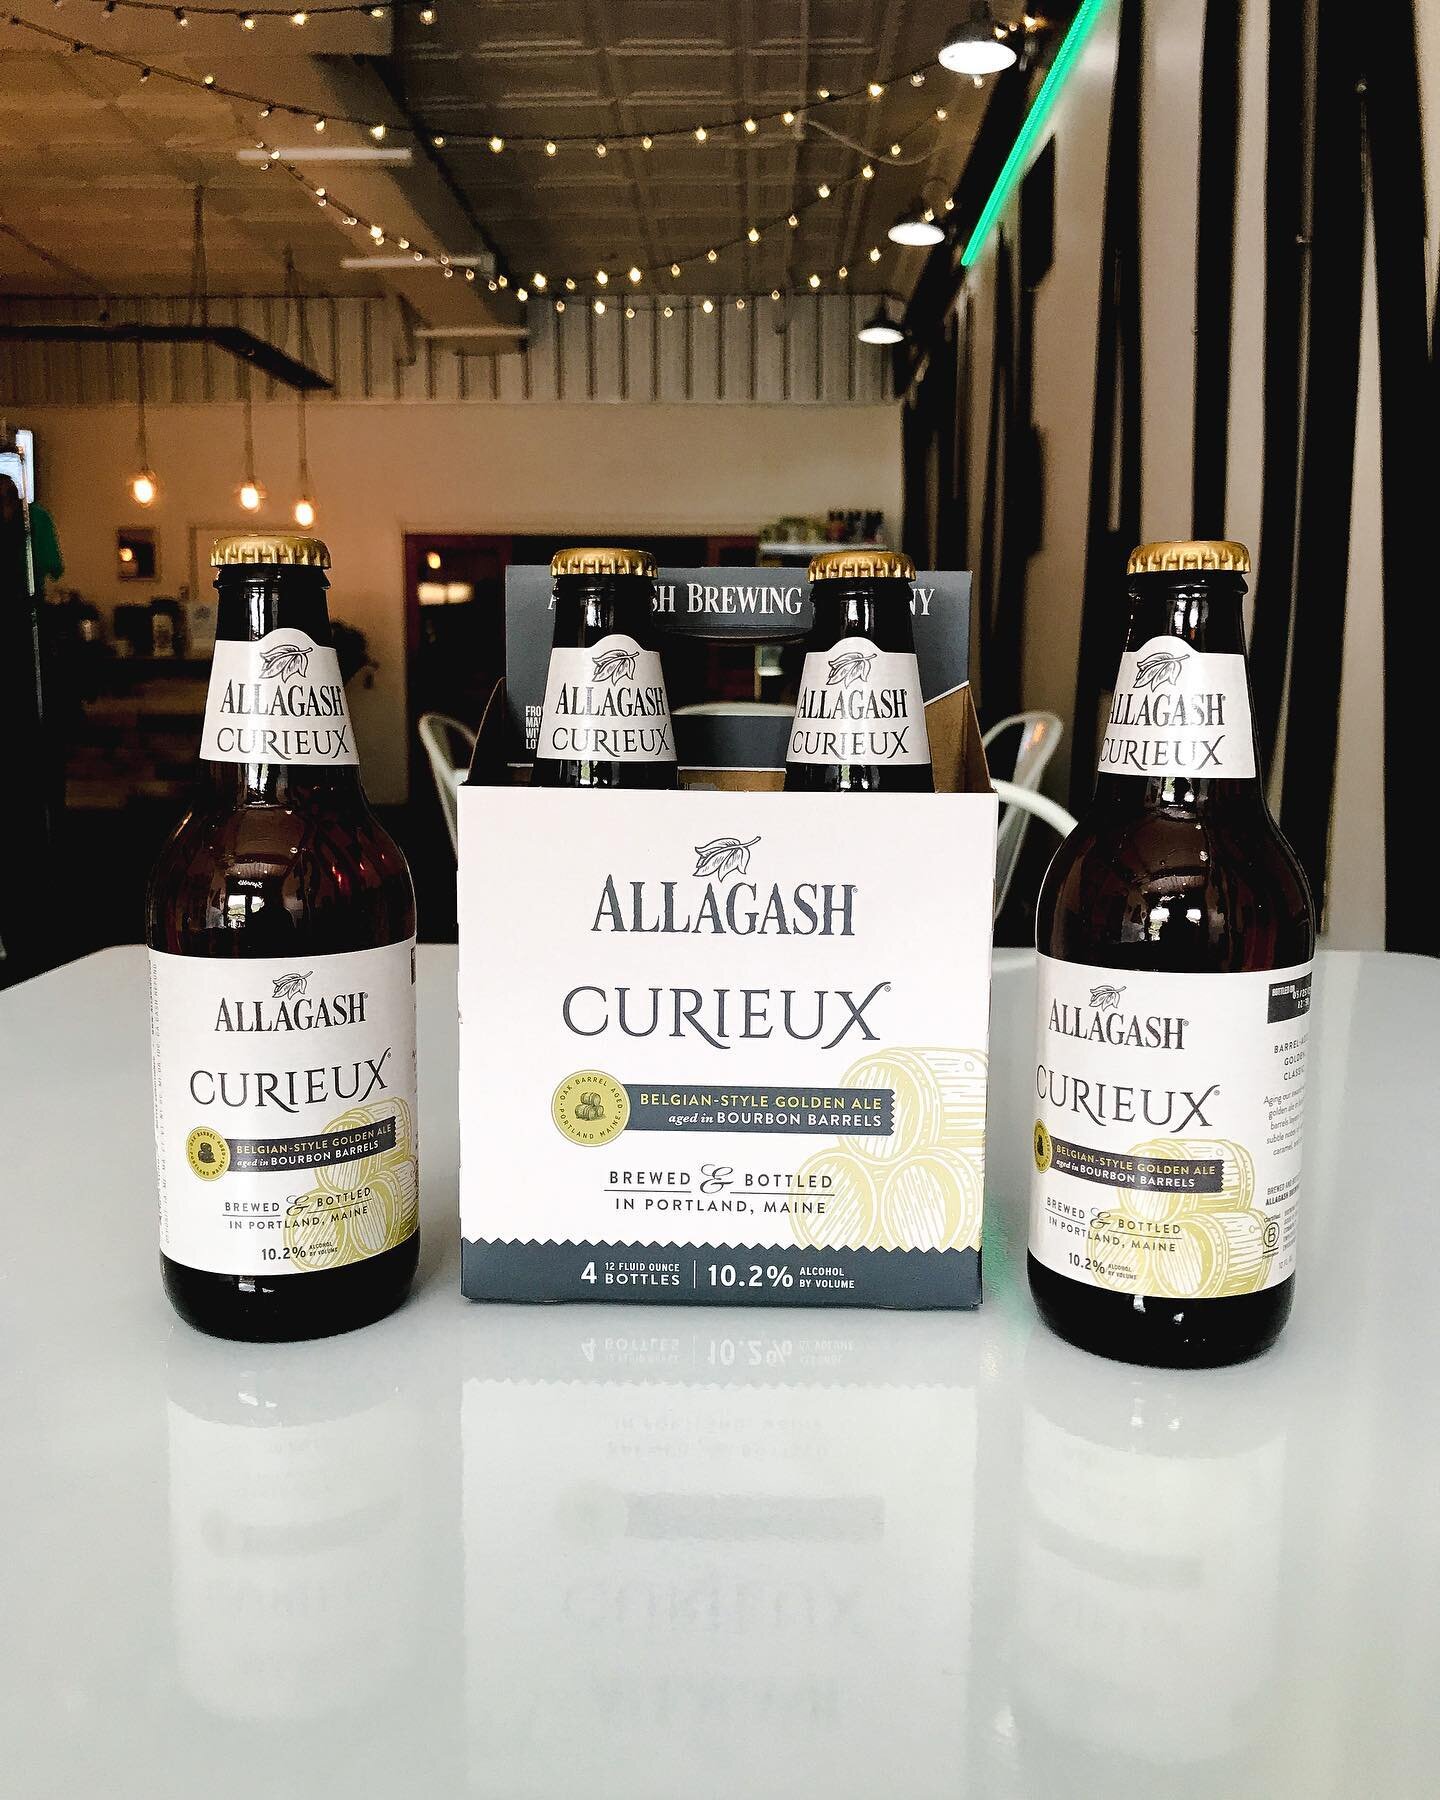 This weekend&rsquo;s craft feature 🙌🏼

🍺@allagashbrewing Curieux

A Belgian-style golden ale aged in bourbon barrels. Brewed and bottled in Portland, Maine.

One of a handful of new brews in this week! Curieux is available in 4 packs and a single 